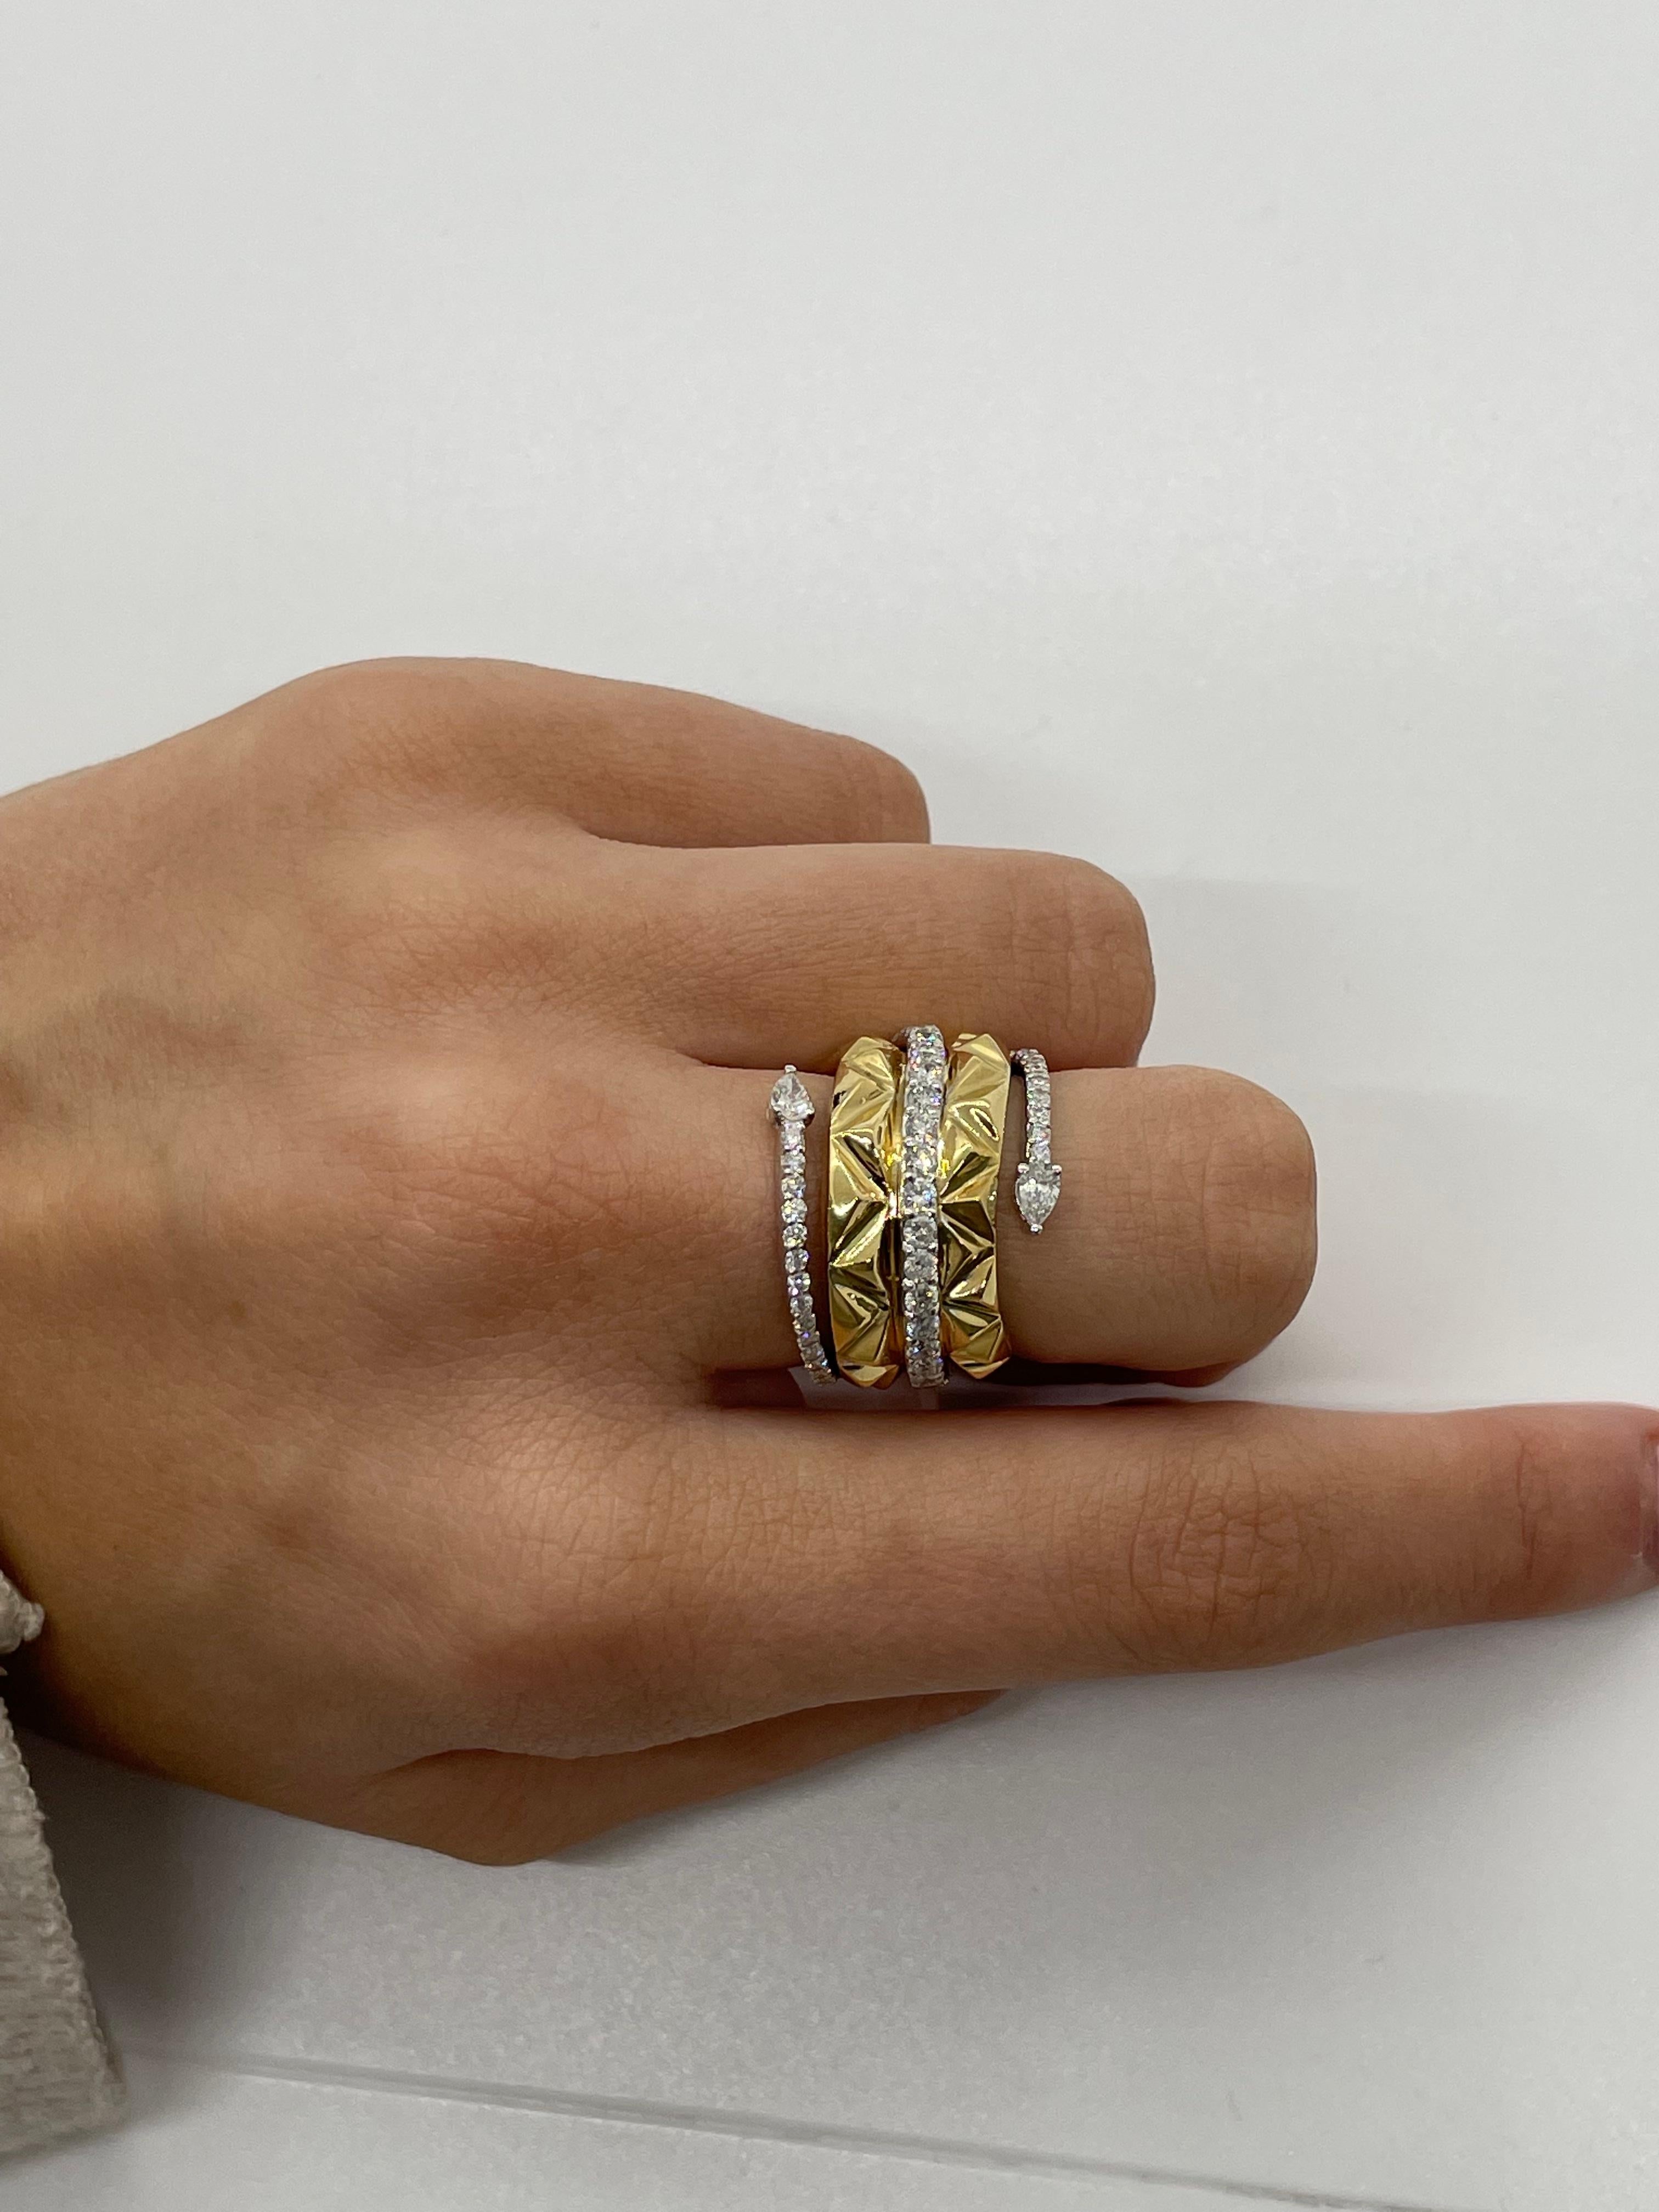 For Sale:  Okre by Yessayan, Pyramid Yellow & White Gold Pear Diamond Ring 2